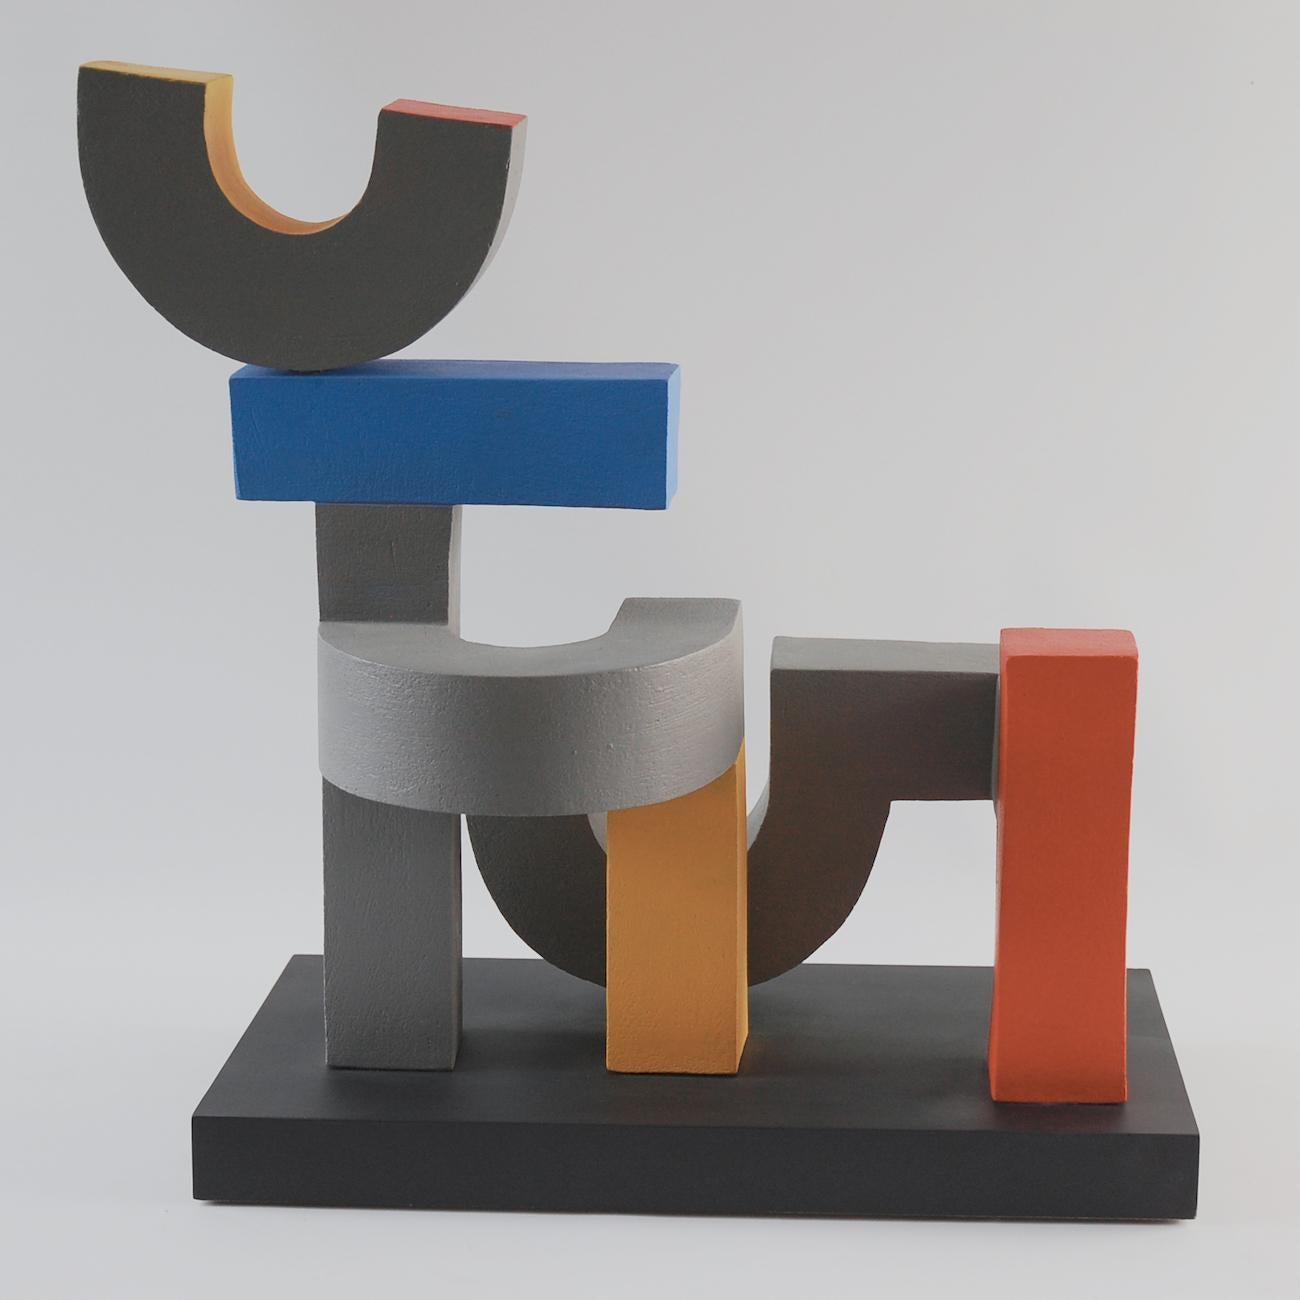 Assembly by Patricia Volk. Fired clay constructed, painted and mounted on MDF, 51 cm × 46 cm × 25 cm.
Patricia Volk is a member of the Royal Society of Sculptors (FRSS) and an Academician of the Royal West of England Academy (RWA). Her work was